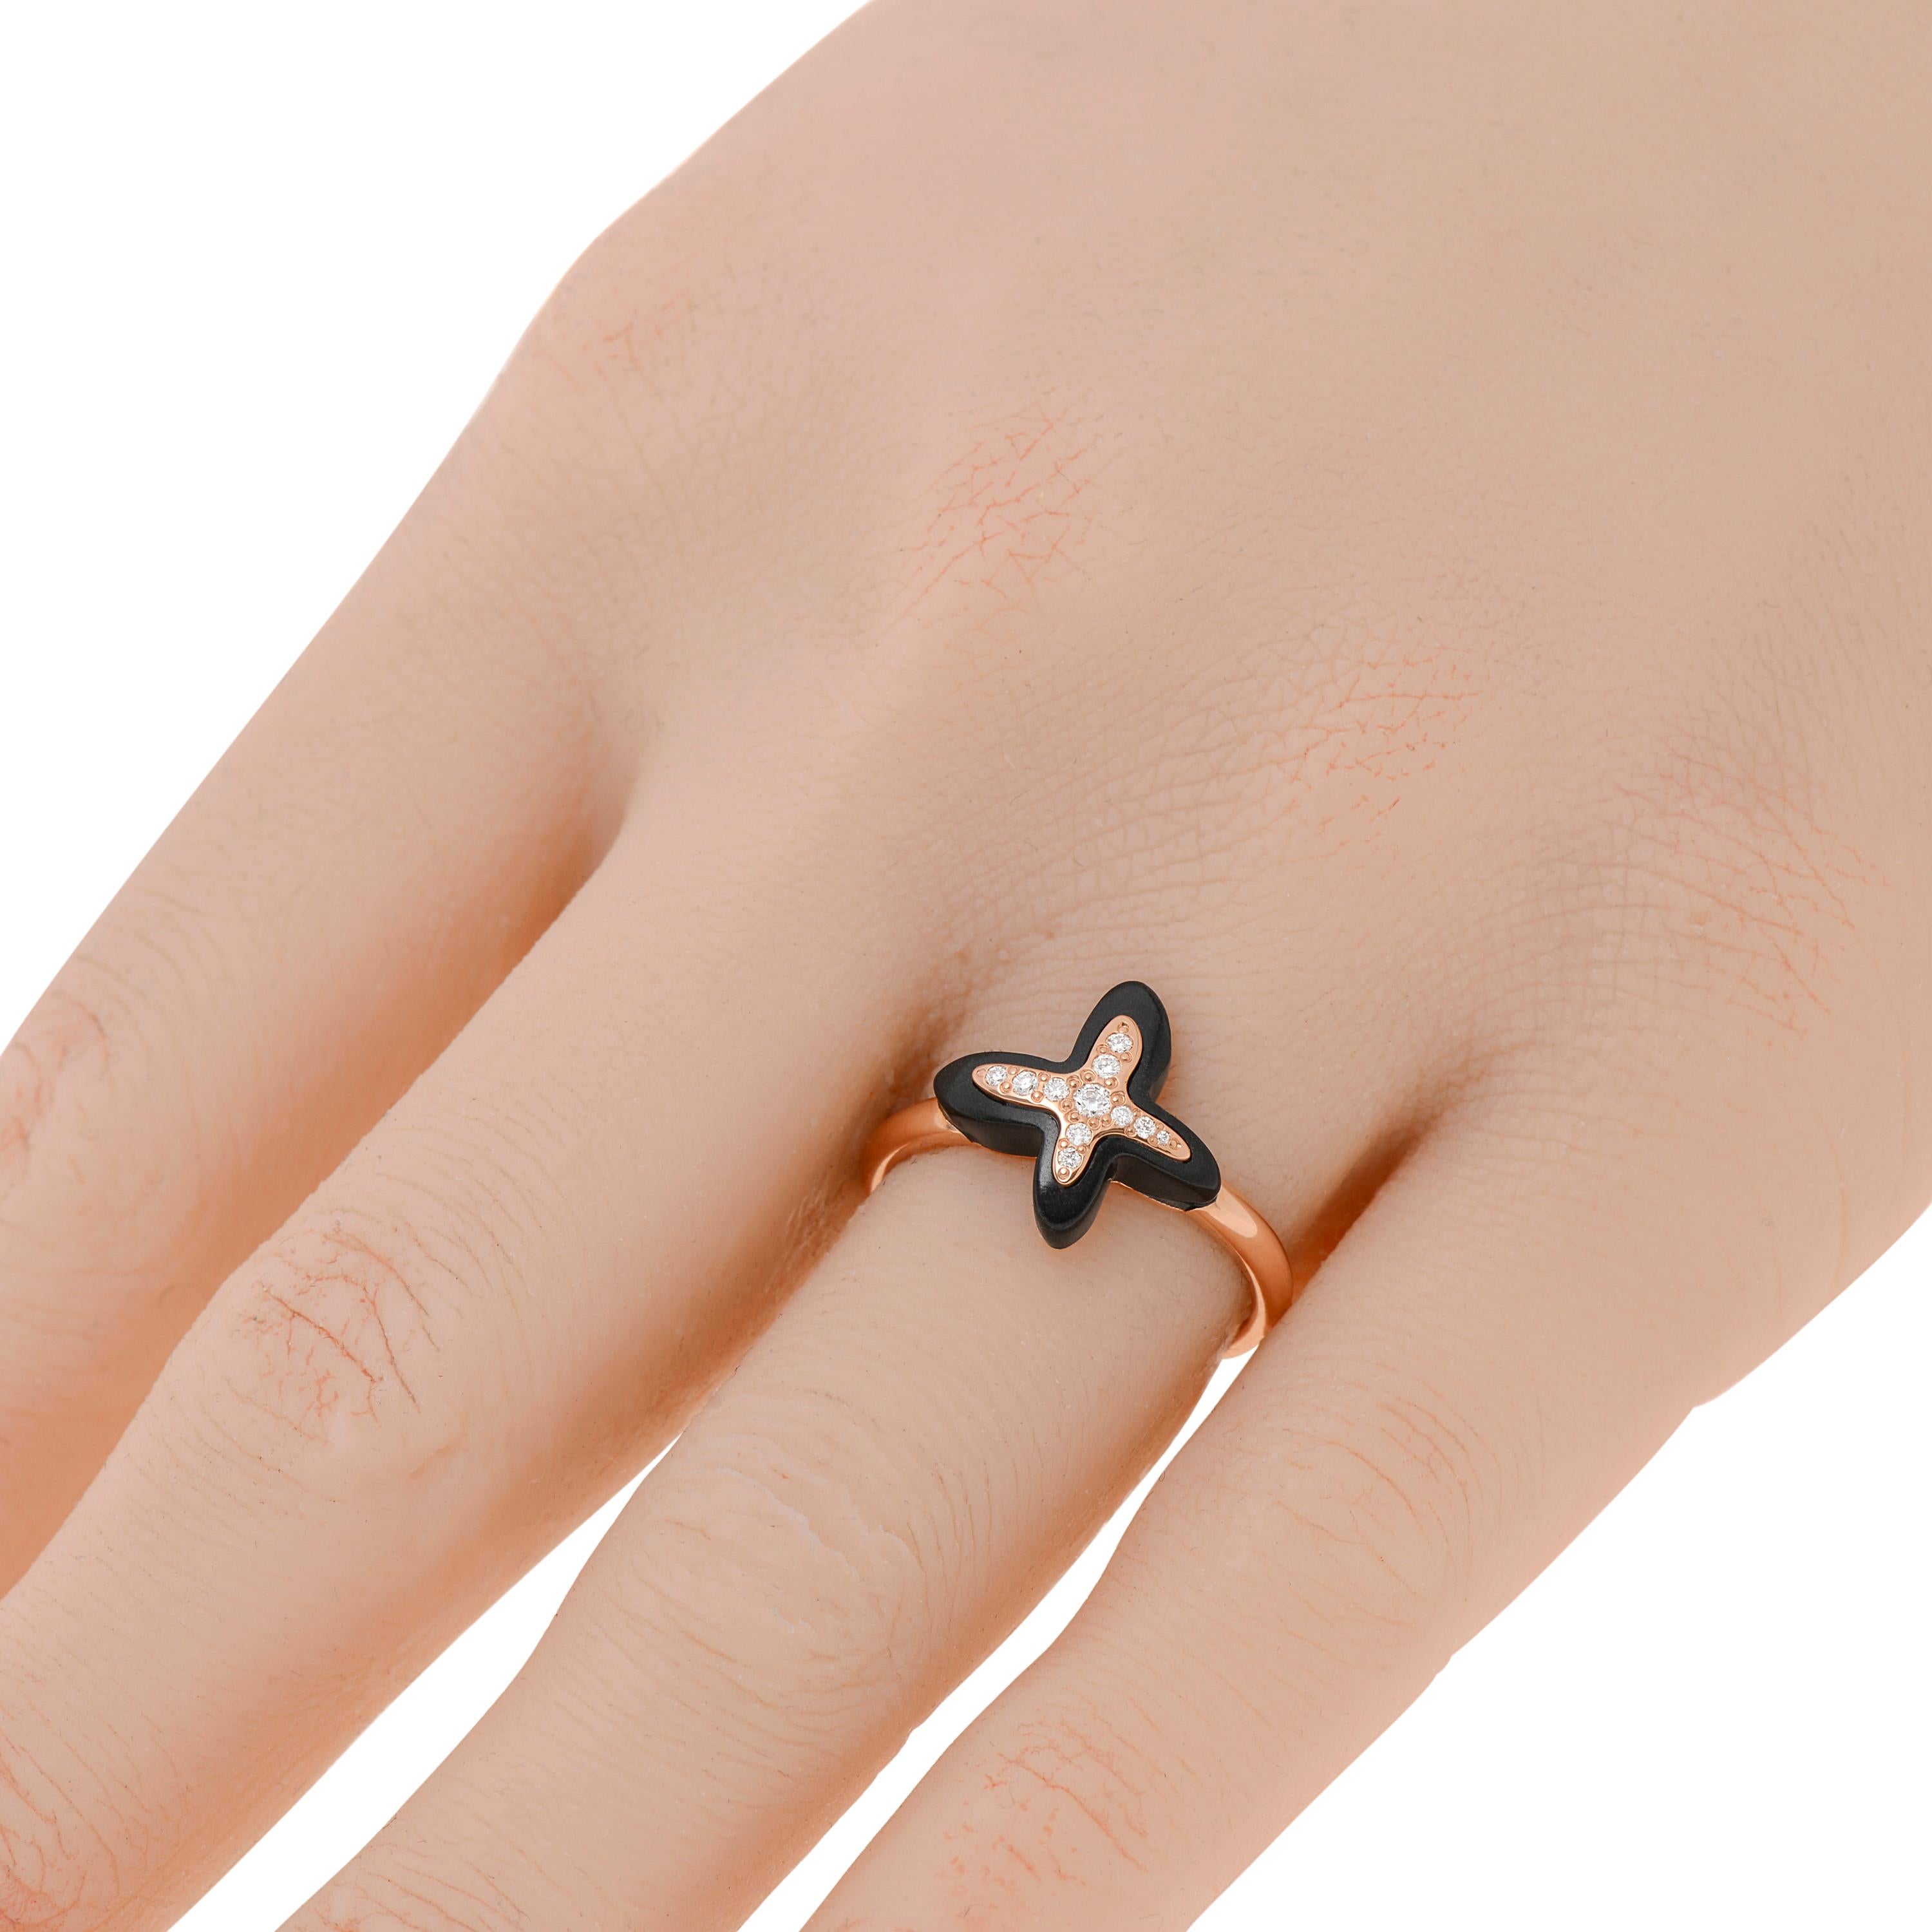 Mimi Milano 18K rose gold ring features an iconic Onyx silhouette glittering with a center of 0.05ct. tw. diamonds. The ring size is 7.25 (55.1). The weight is 2.61g. The decoration size is 1/2